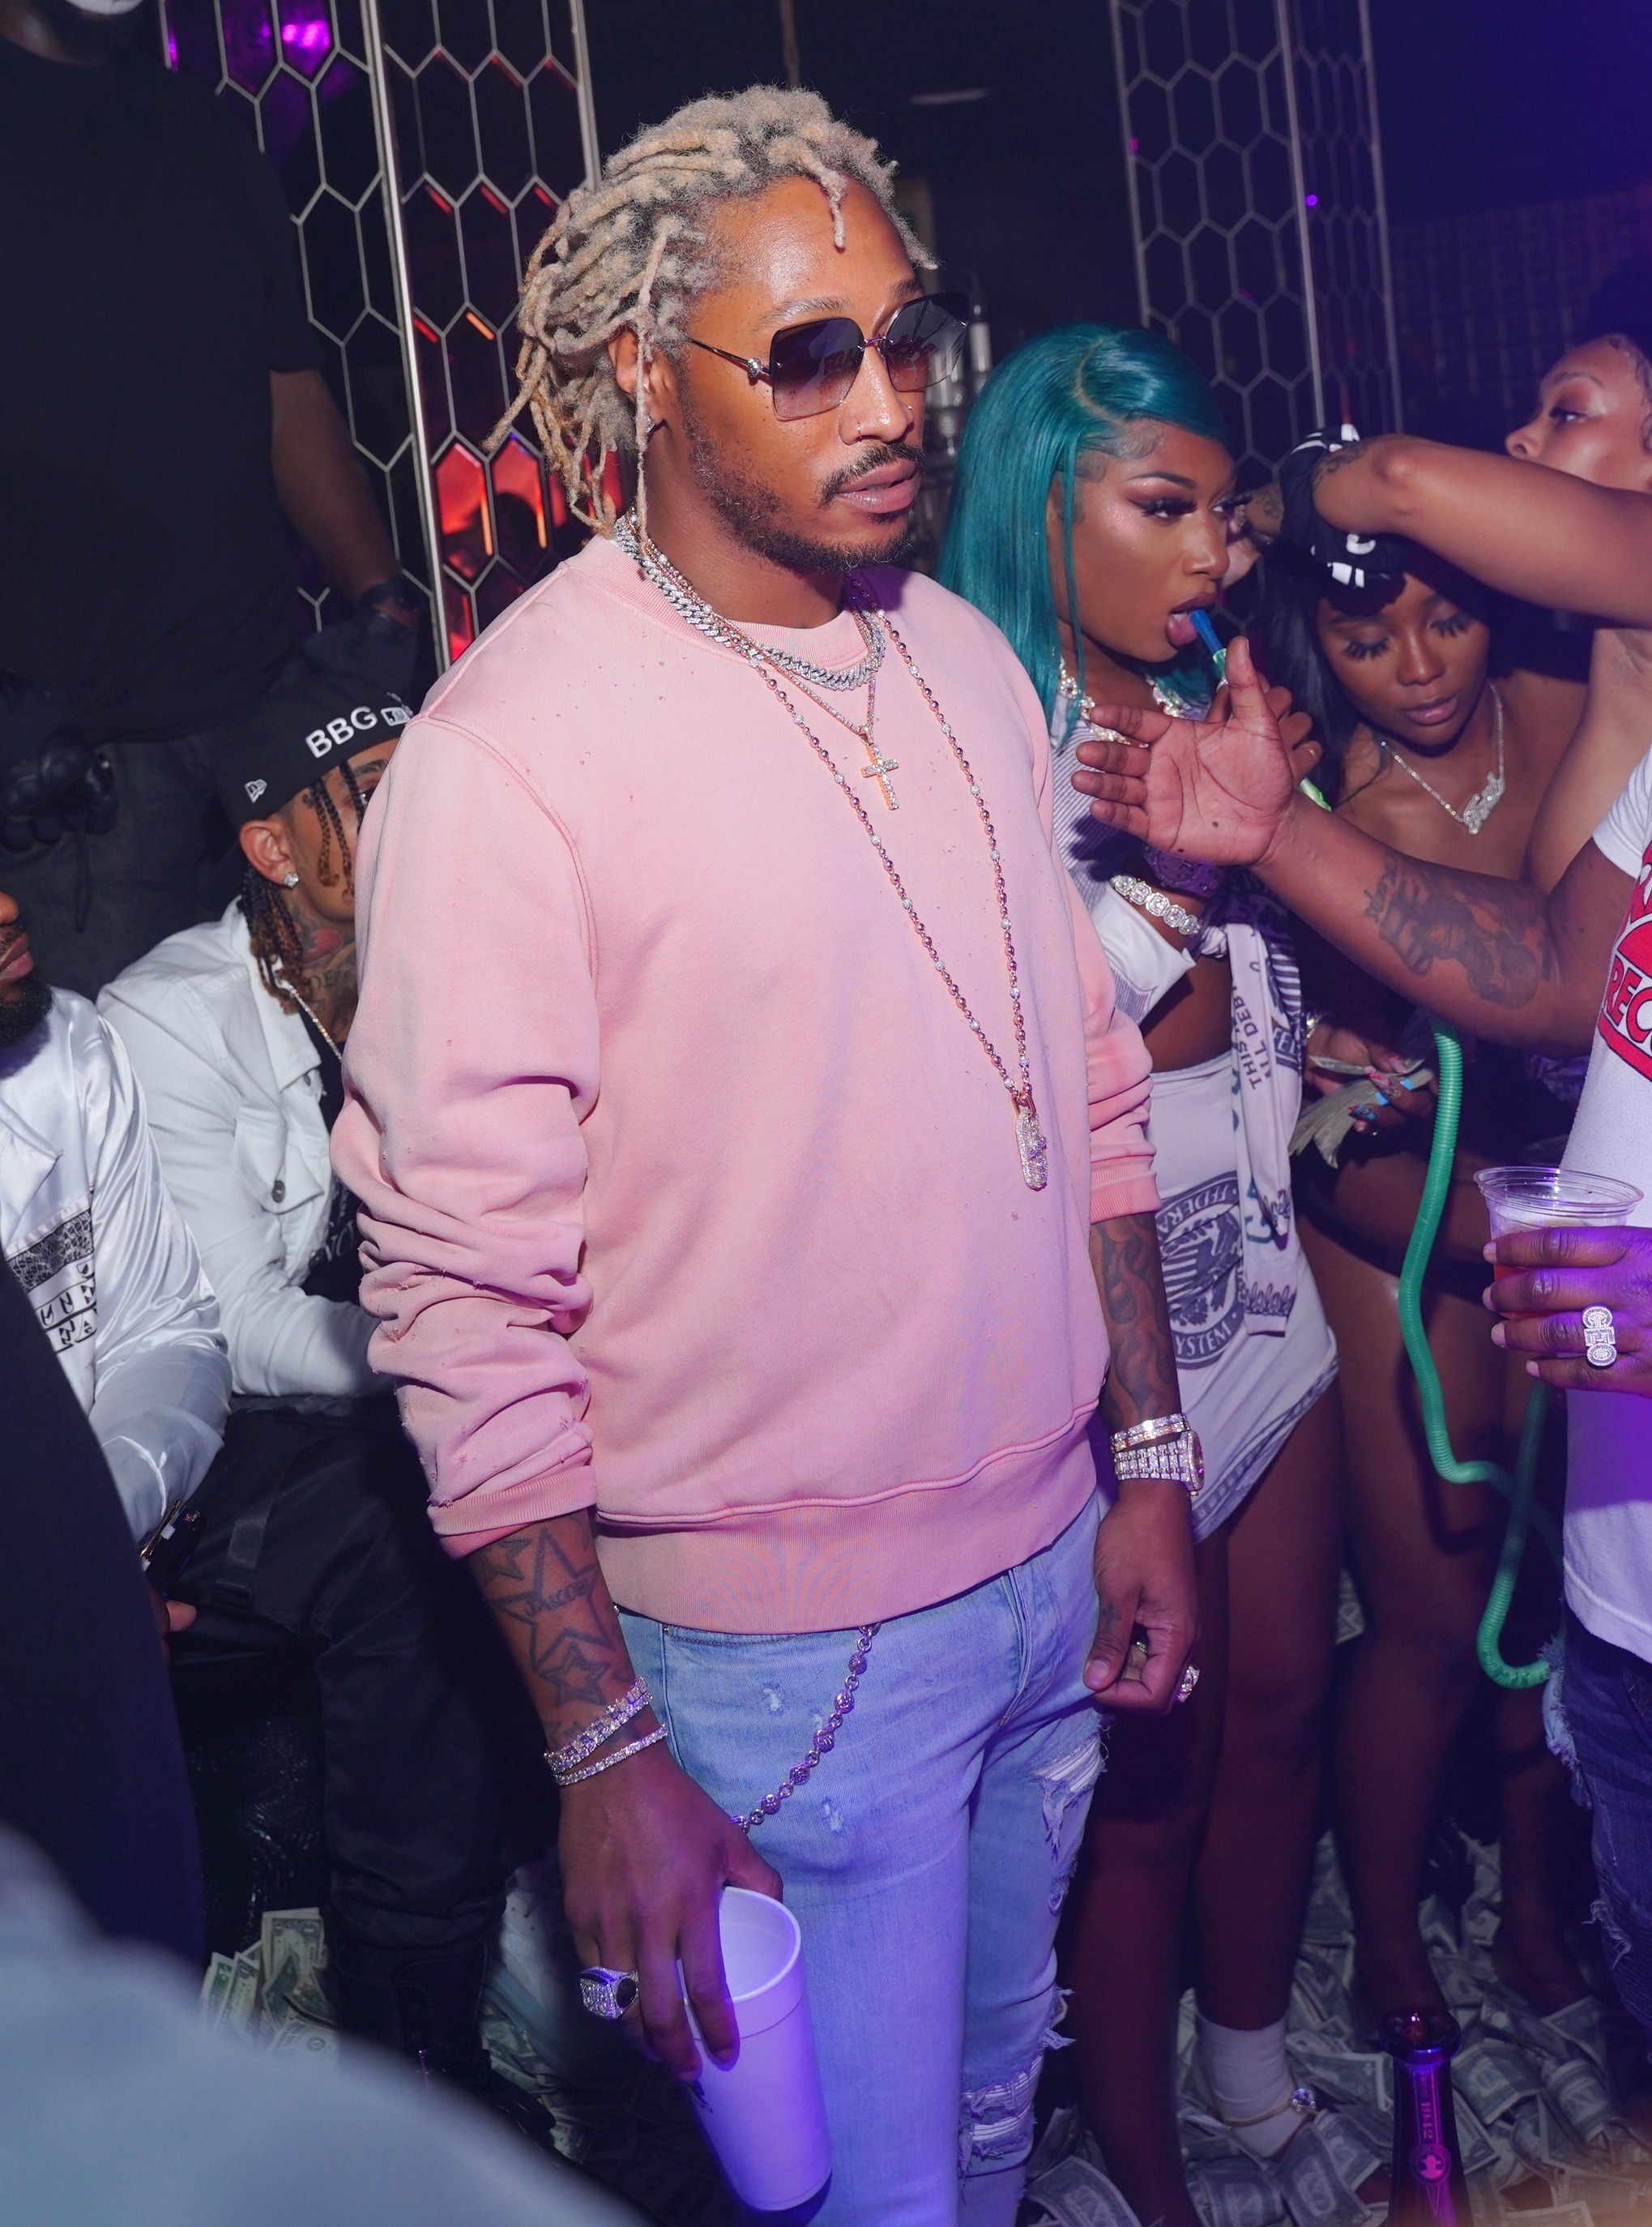 Megan Thee Stallion standing behind rapper Future with bandage on her feet